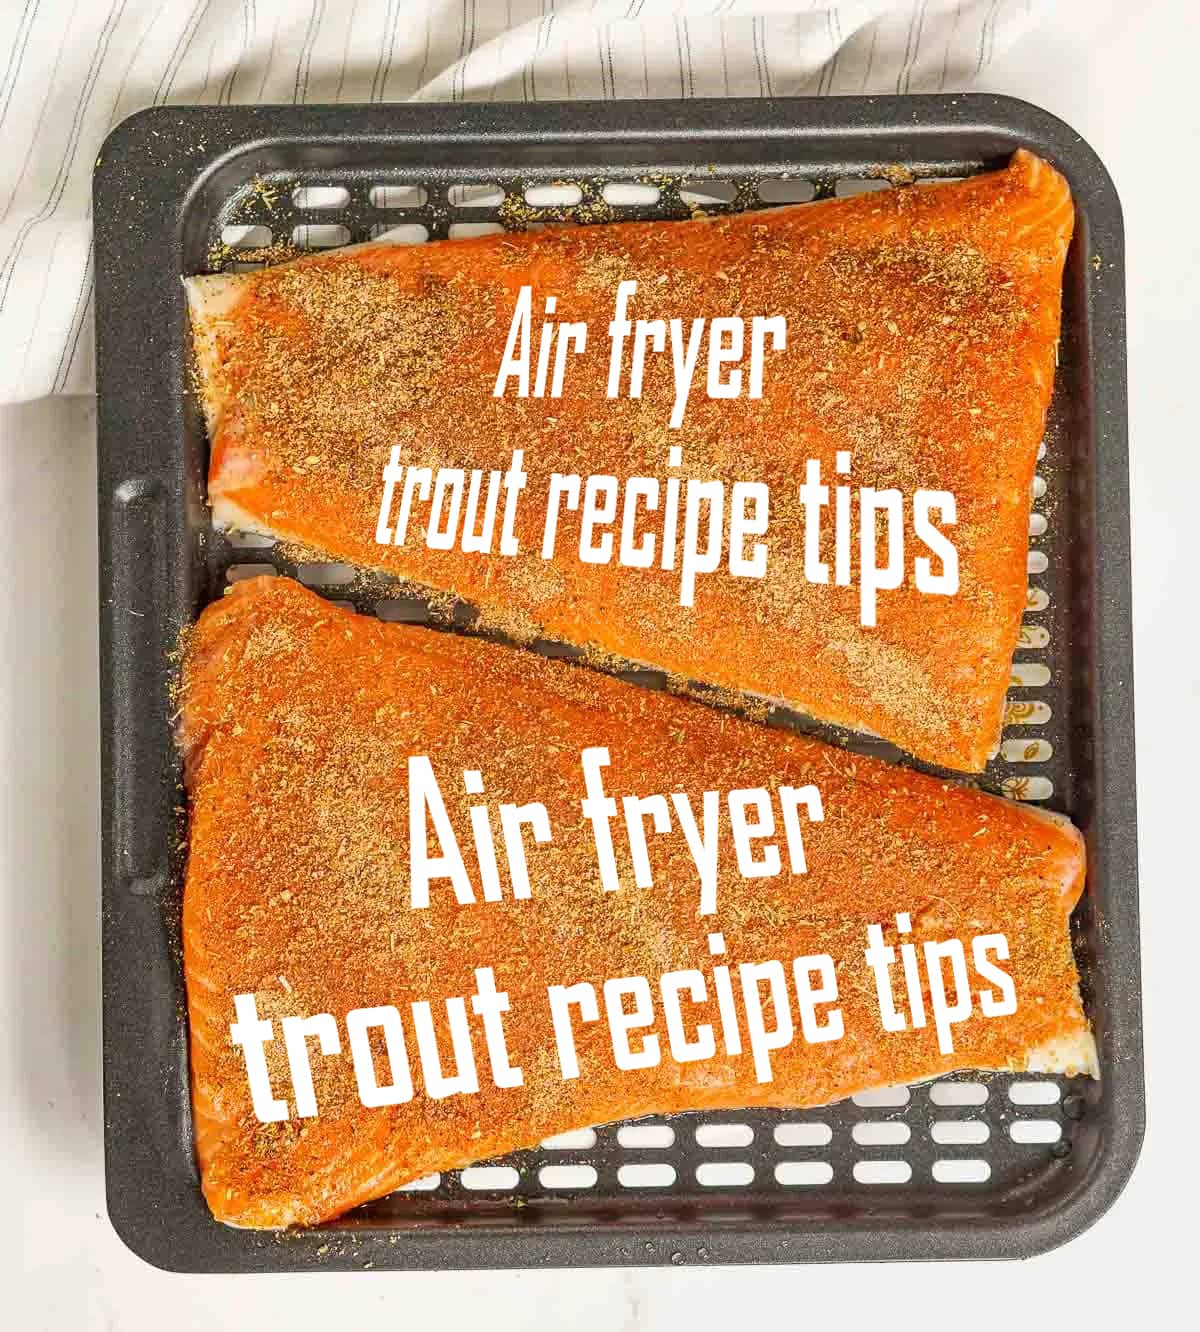 Air fryer trout recipe tips